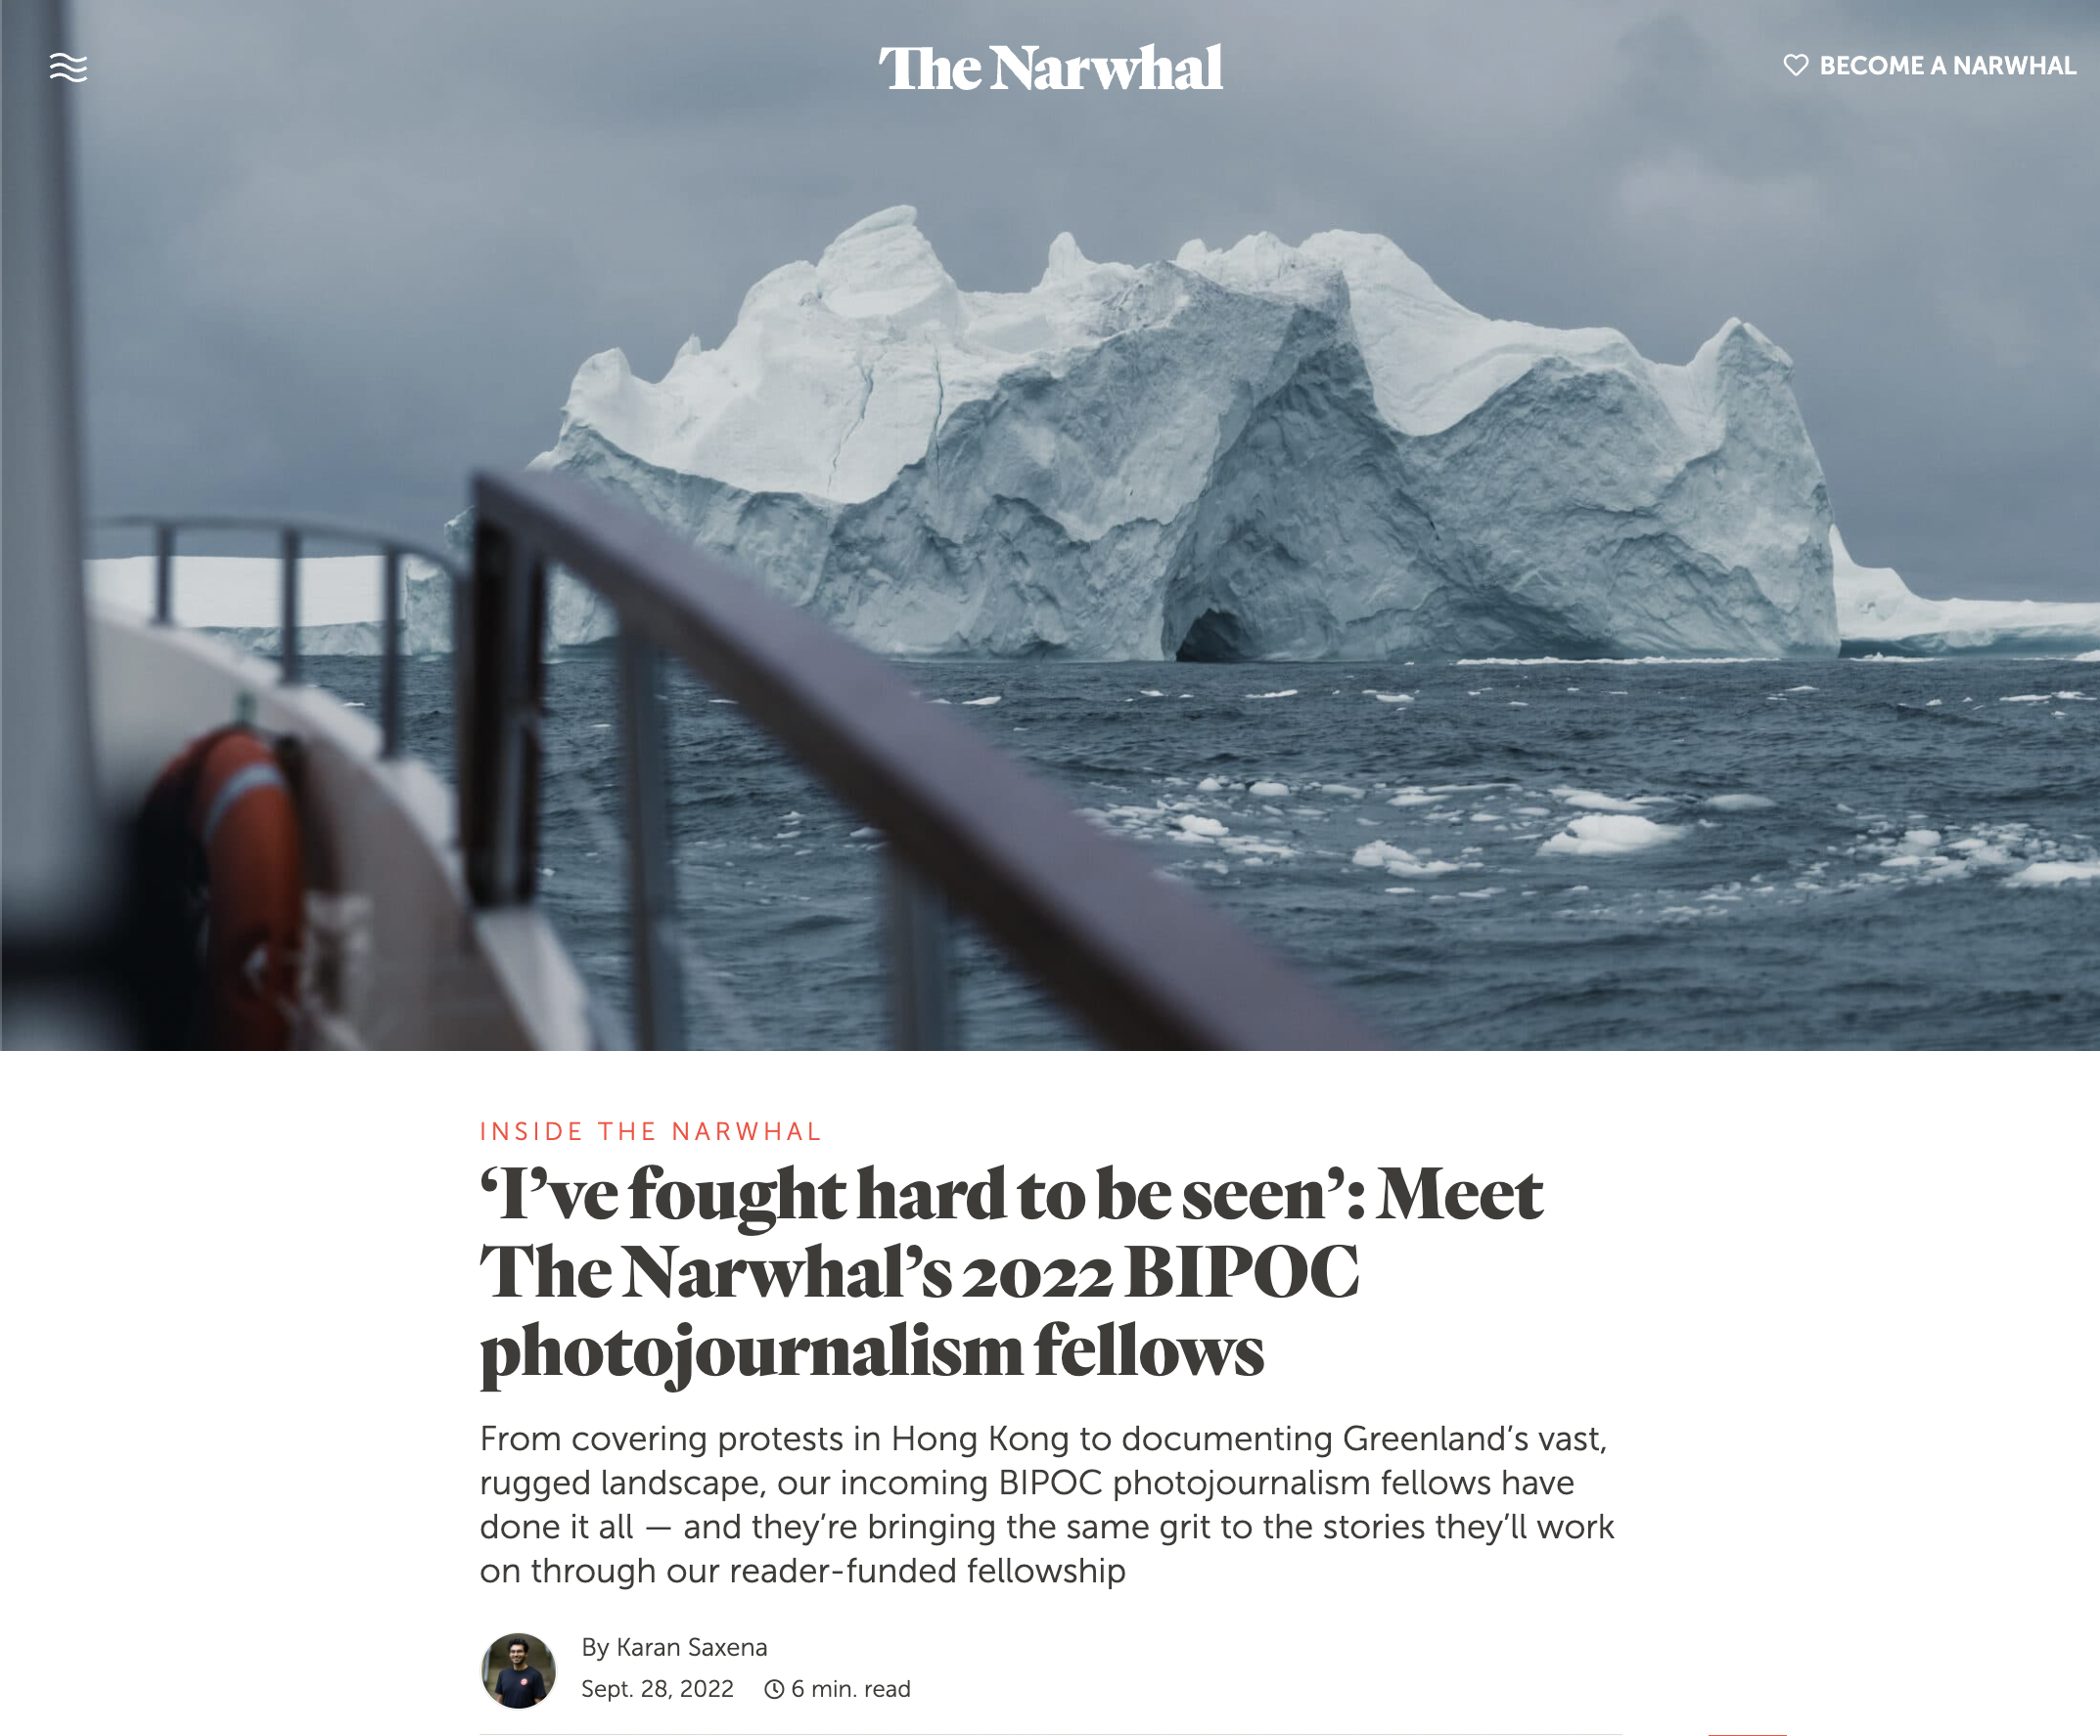 ‘I’ve fought hard to be seen’: Meet The Narwhal’s 2022 BIPOC photojournalism fellows